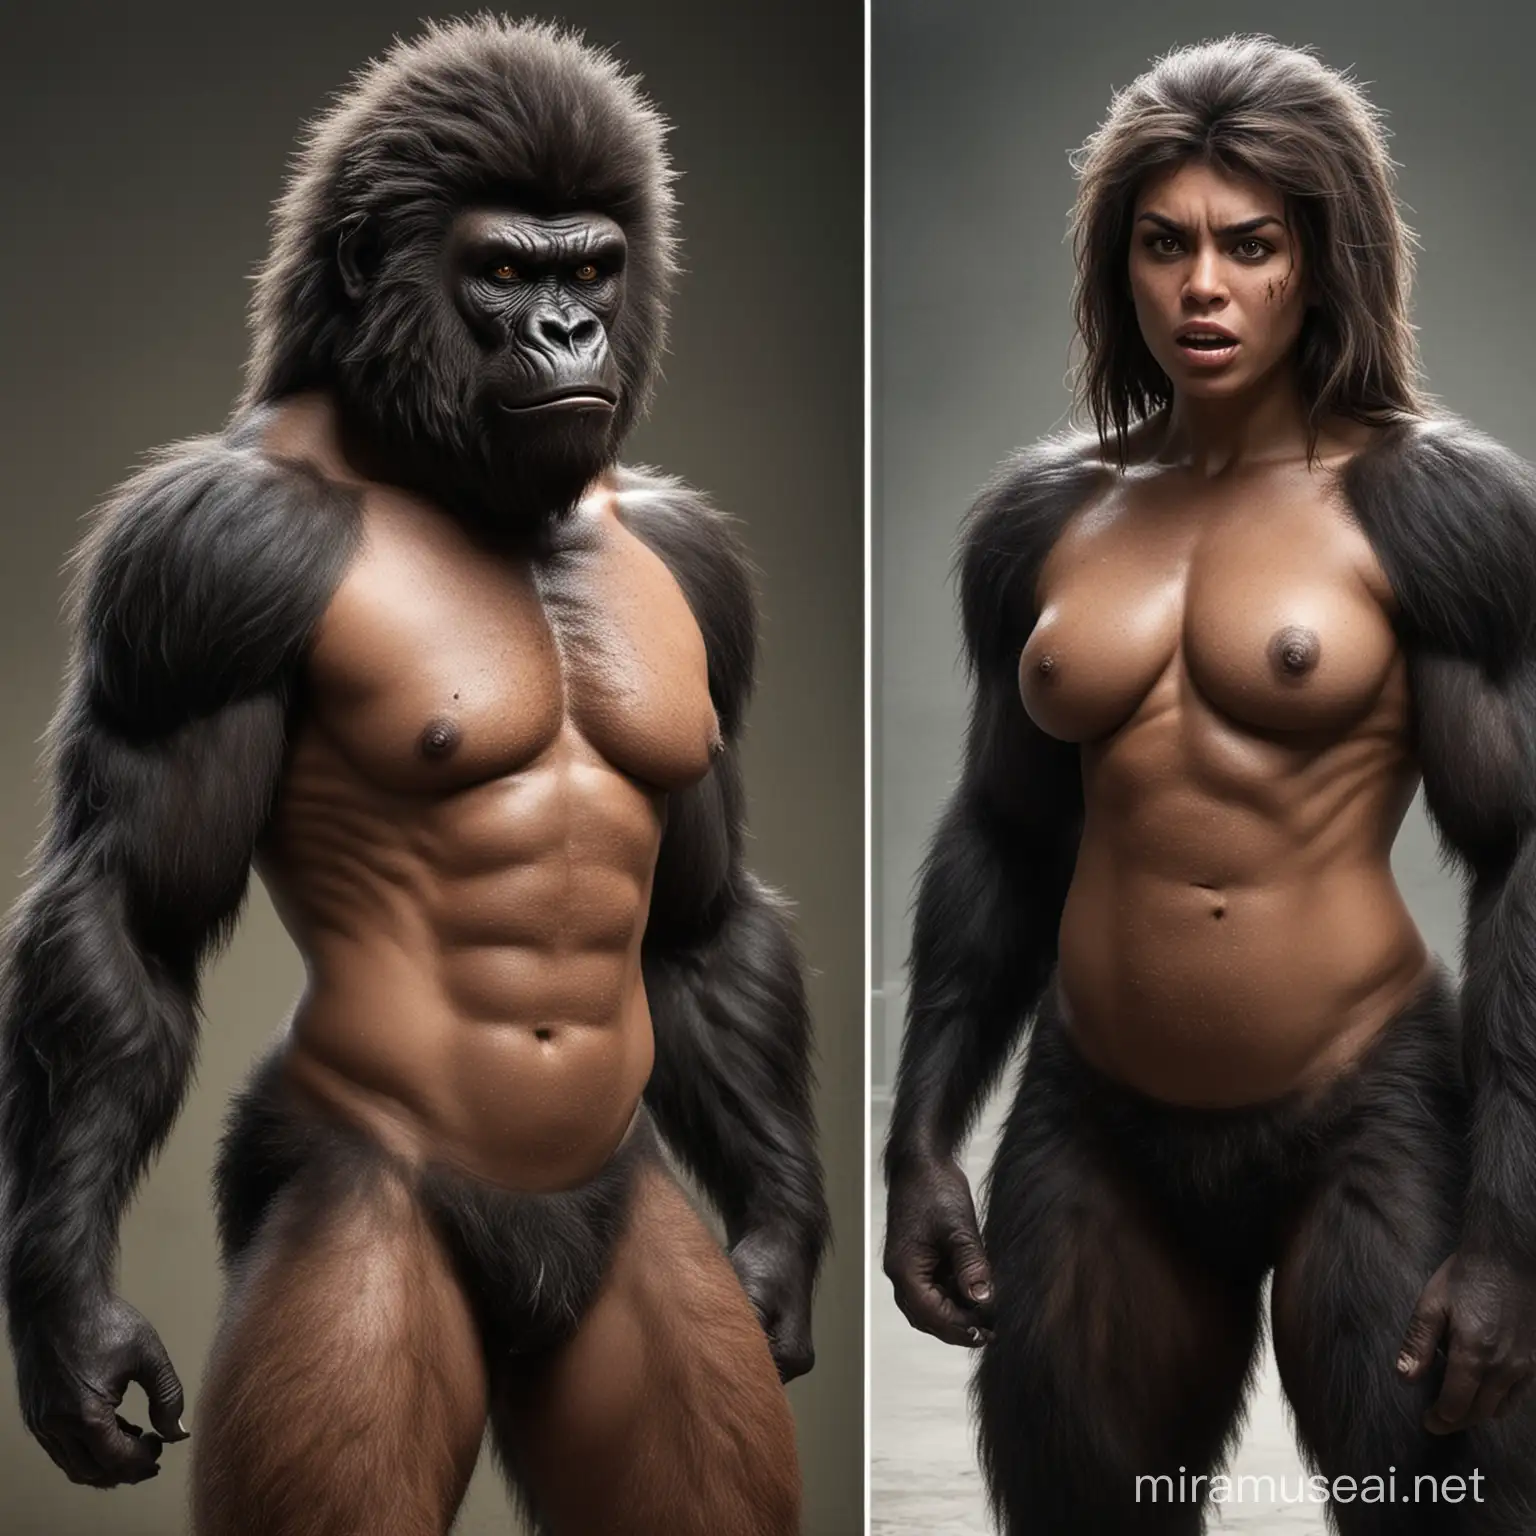 A very hairy girl transform to weregorilla showing the very hairy female body with brown skin with hairy face and sweaty gorilla face 